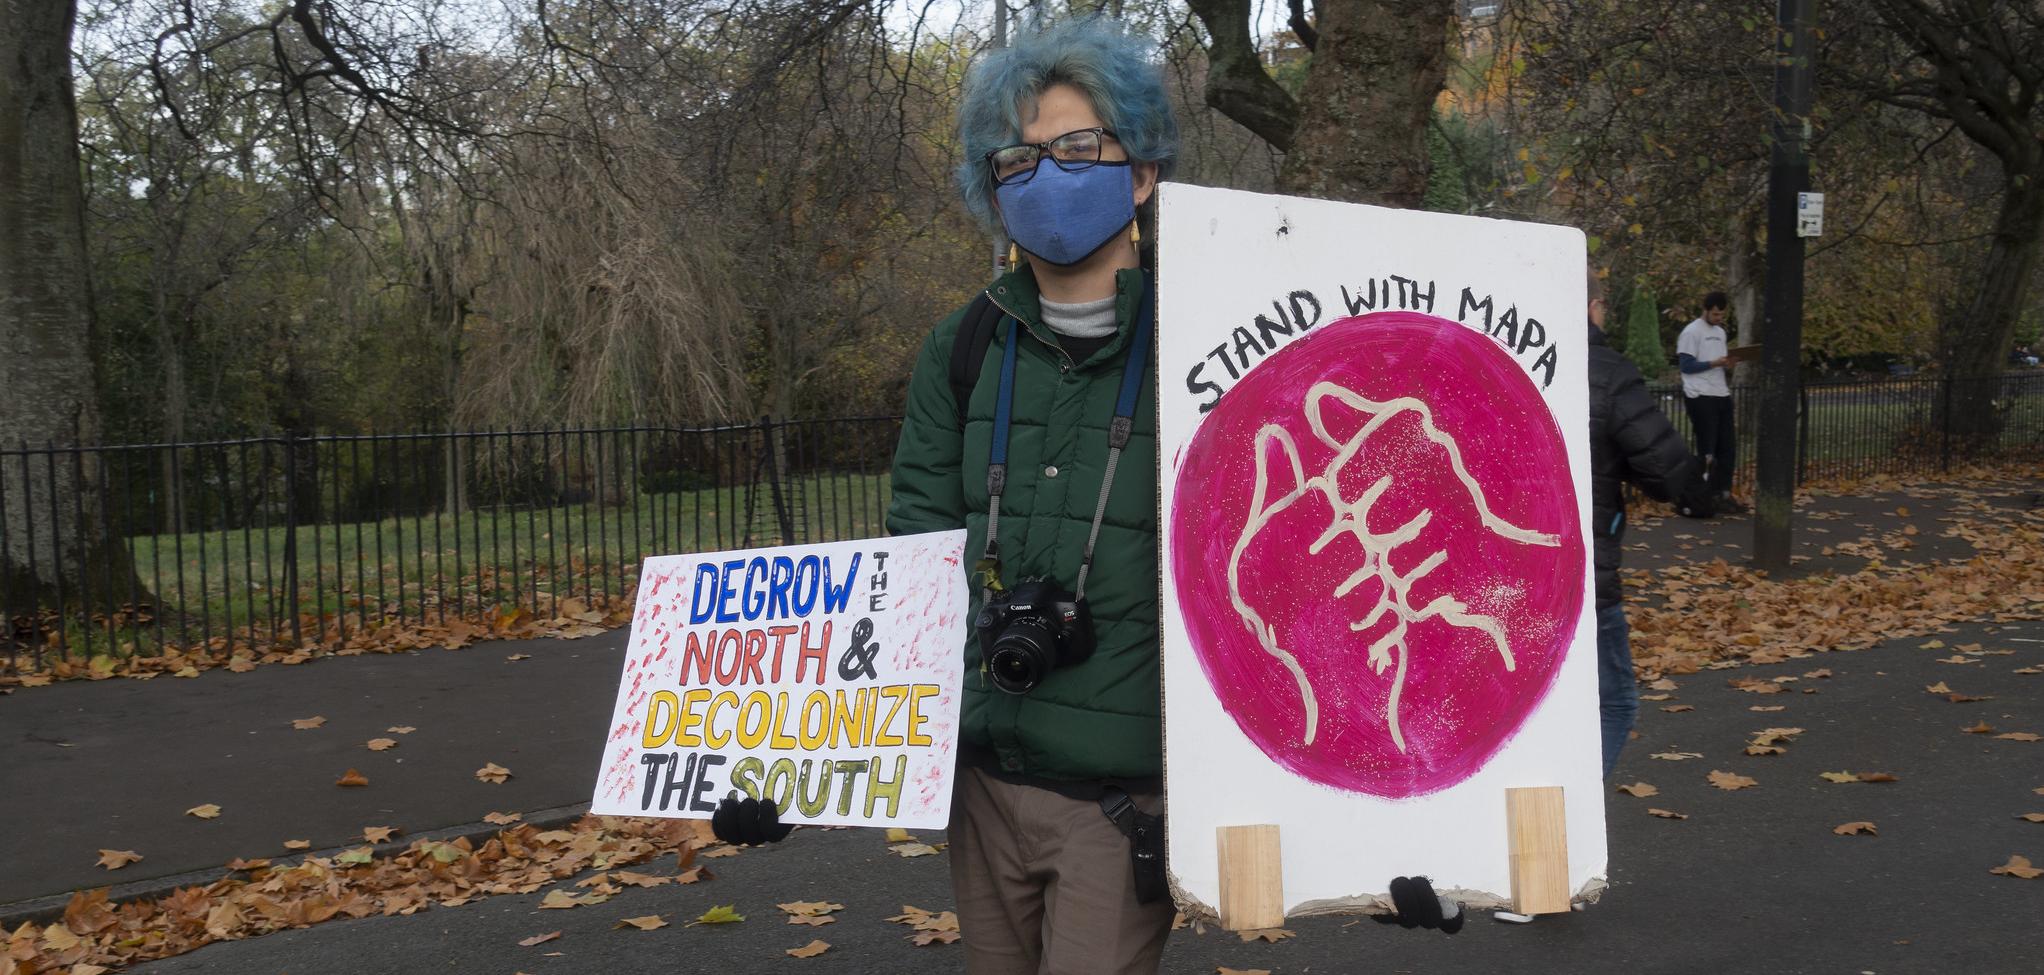 A person at a protest holding a sign that says DeGrow the North and Decolonize the south